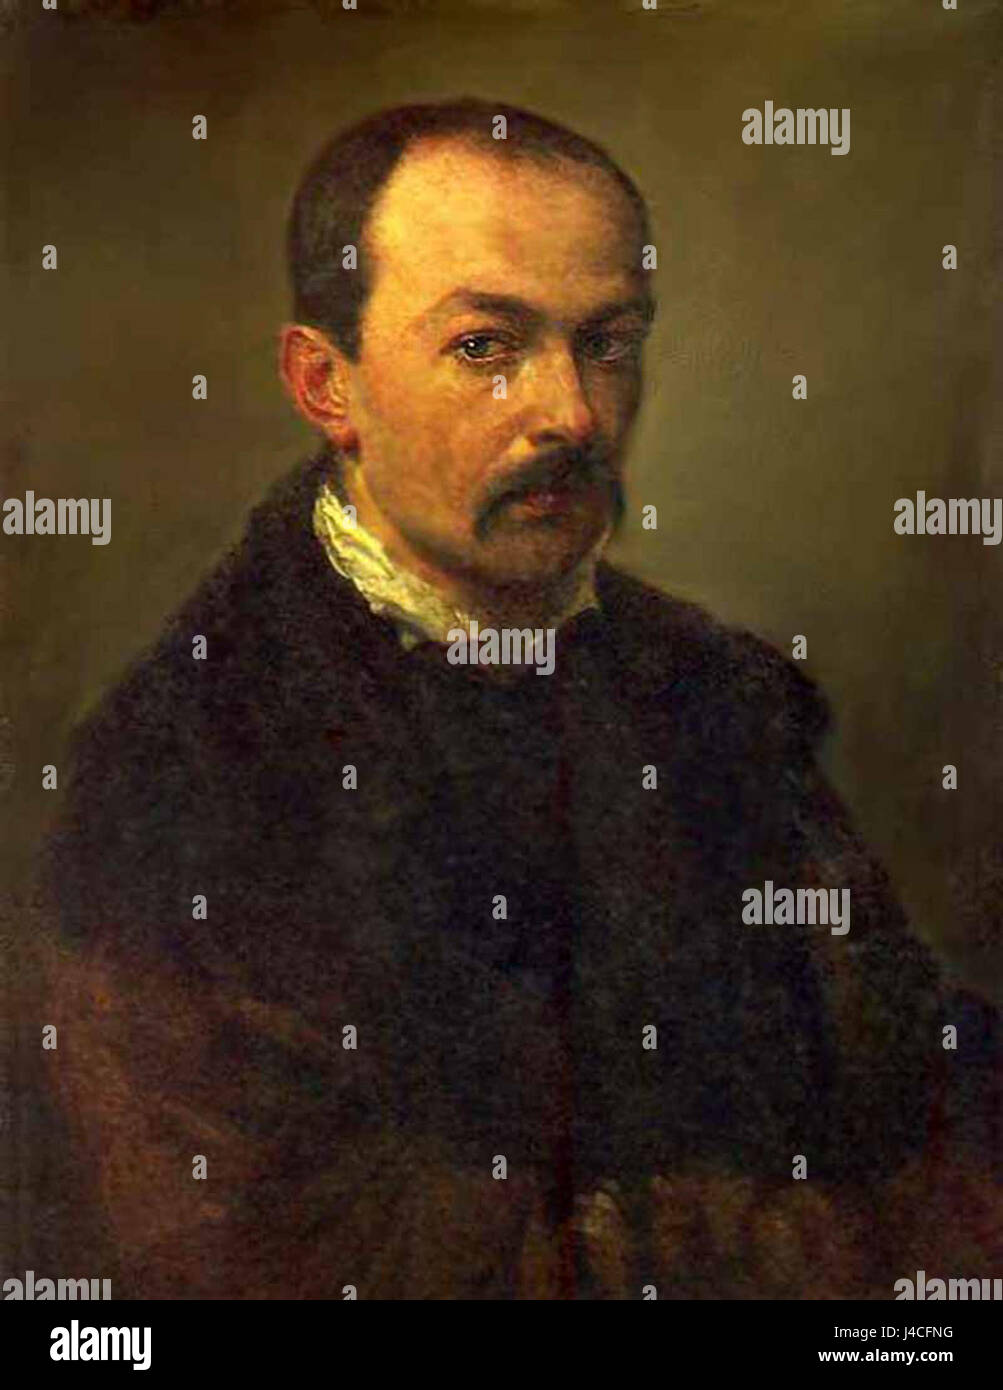 Pavel fedotov 18151852 Banque D'Images